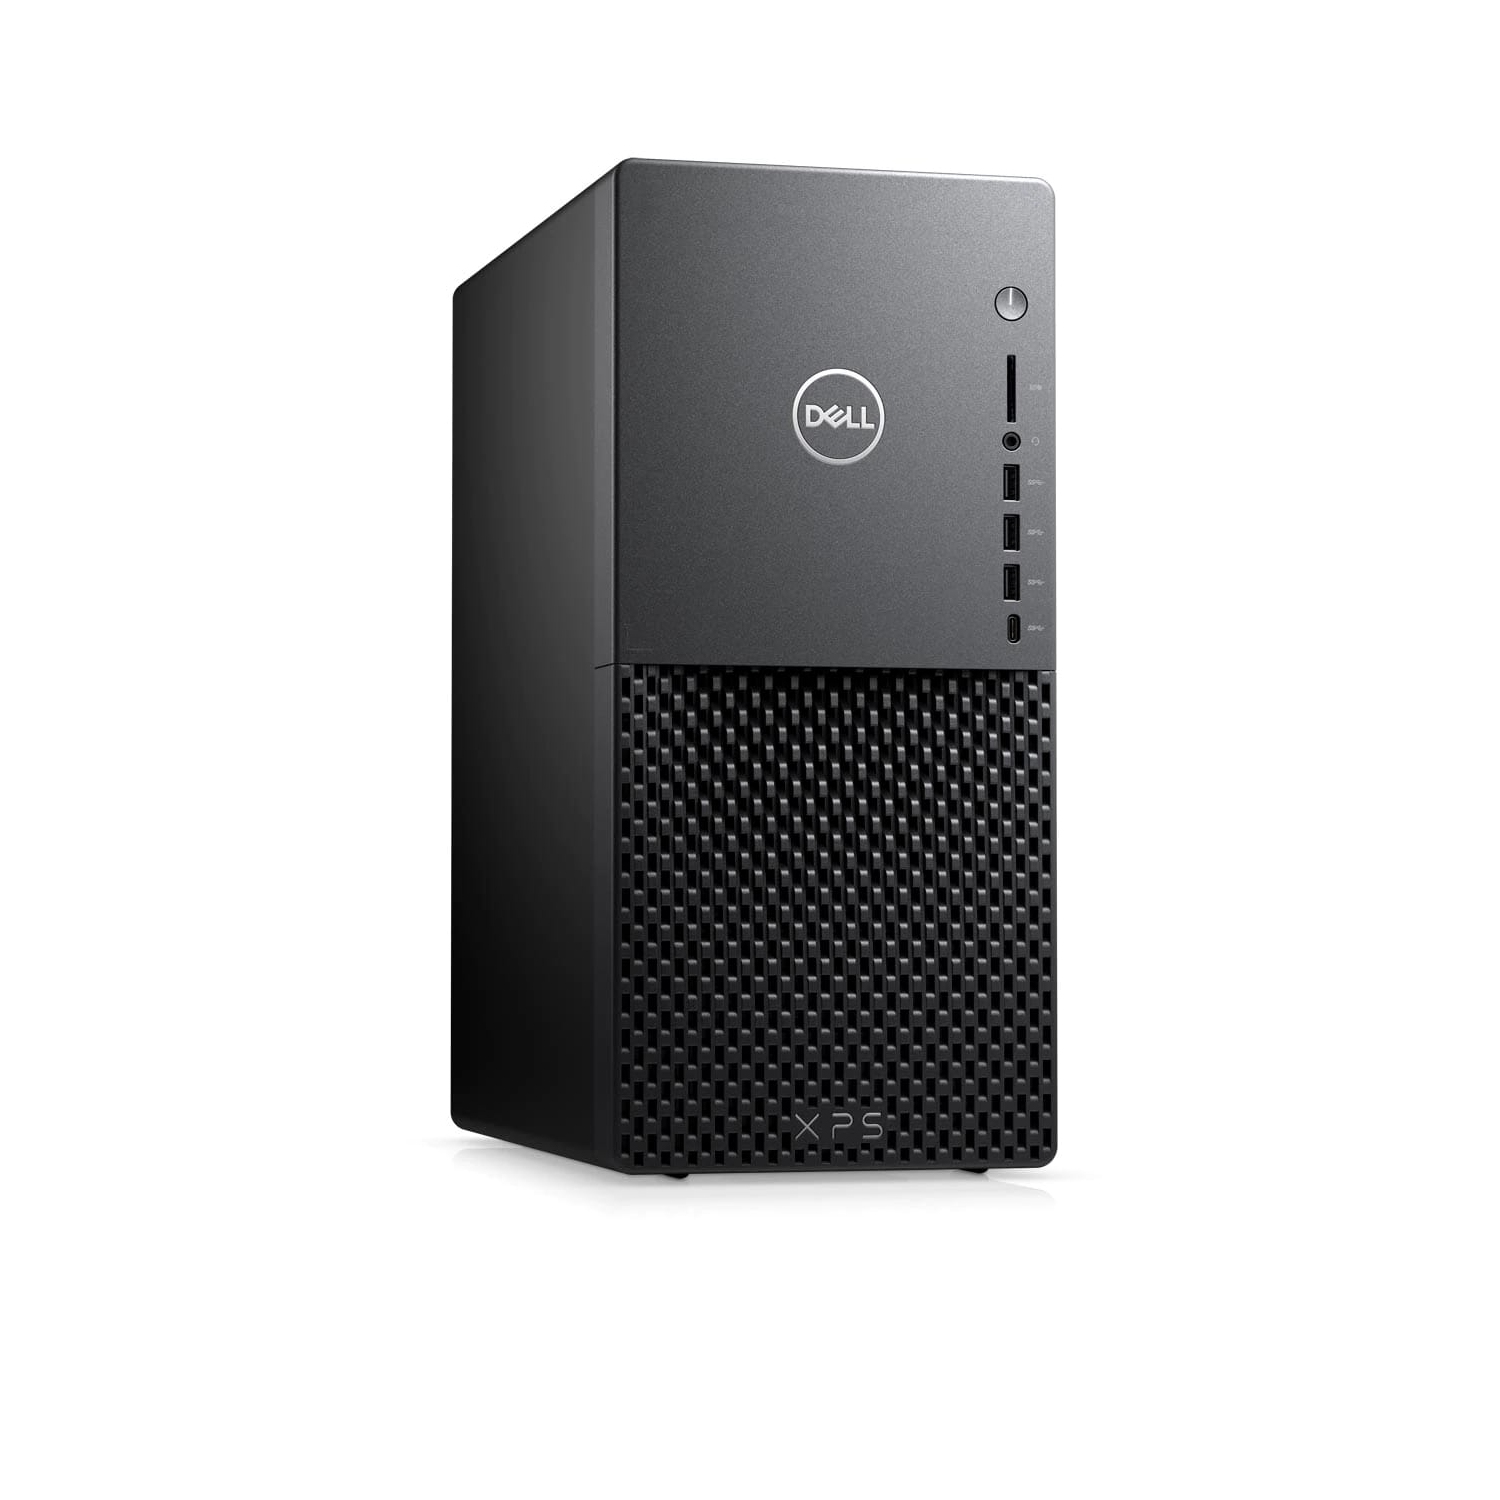 Refurbished (Excellent) - Dell XPS 8940 Desktop (2020) | Core i7 - 1TB SSD - 16GB RAM - RX 5700 | 8 Cores @ 4.9 GHz - 11th Gen CPU Certified Refurbished